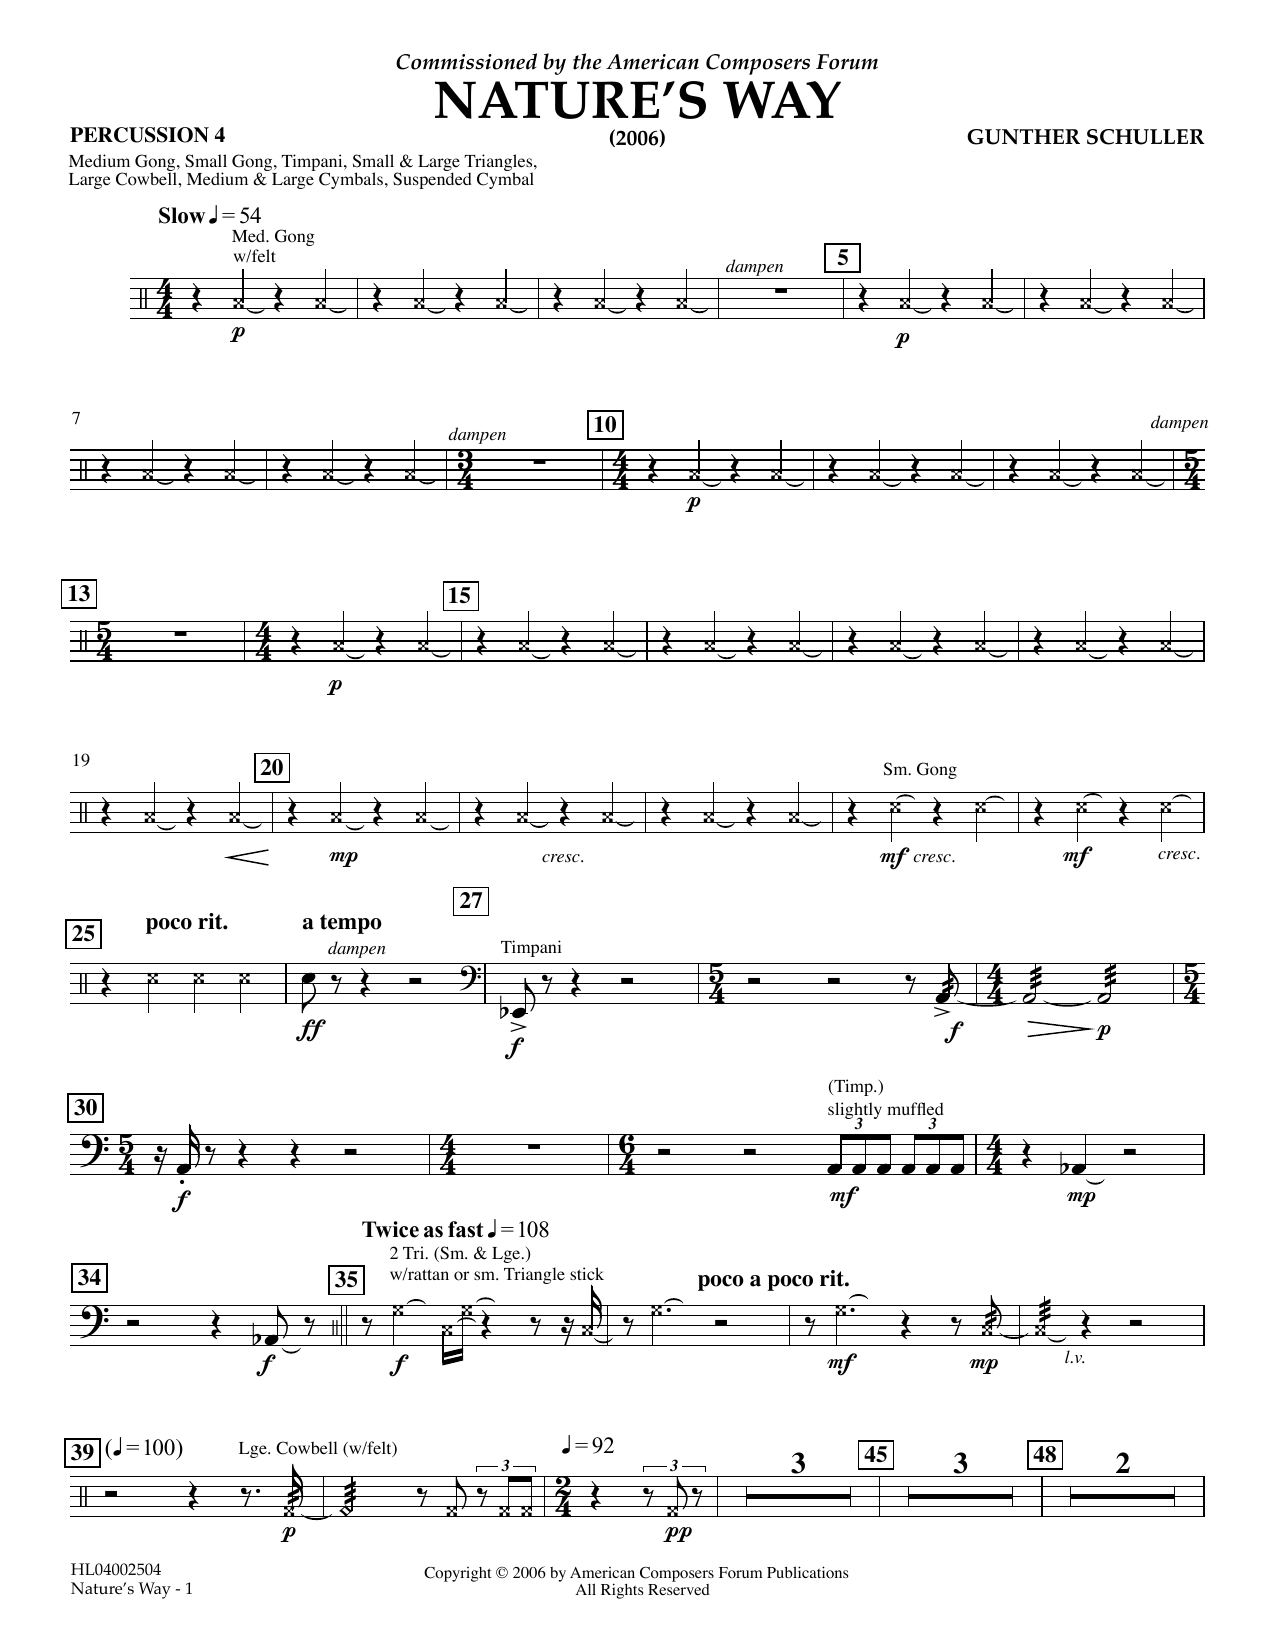 Download Gunther Schuller Nature's Way - Percussion 4 Sheet Music